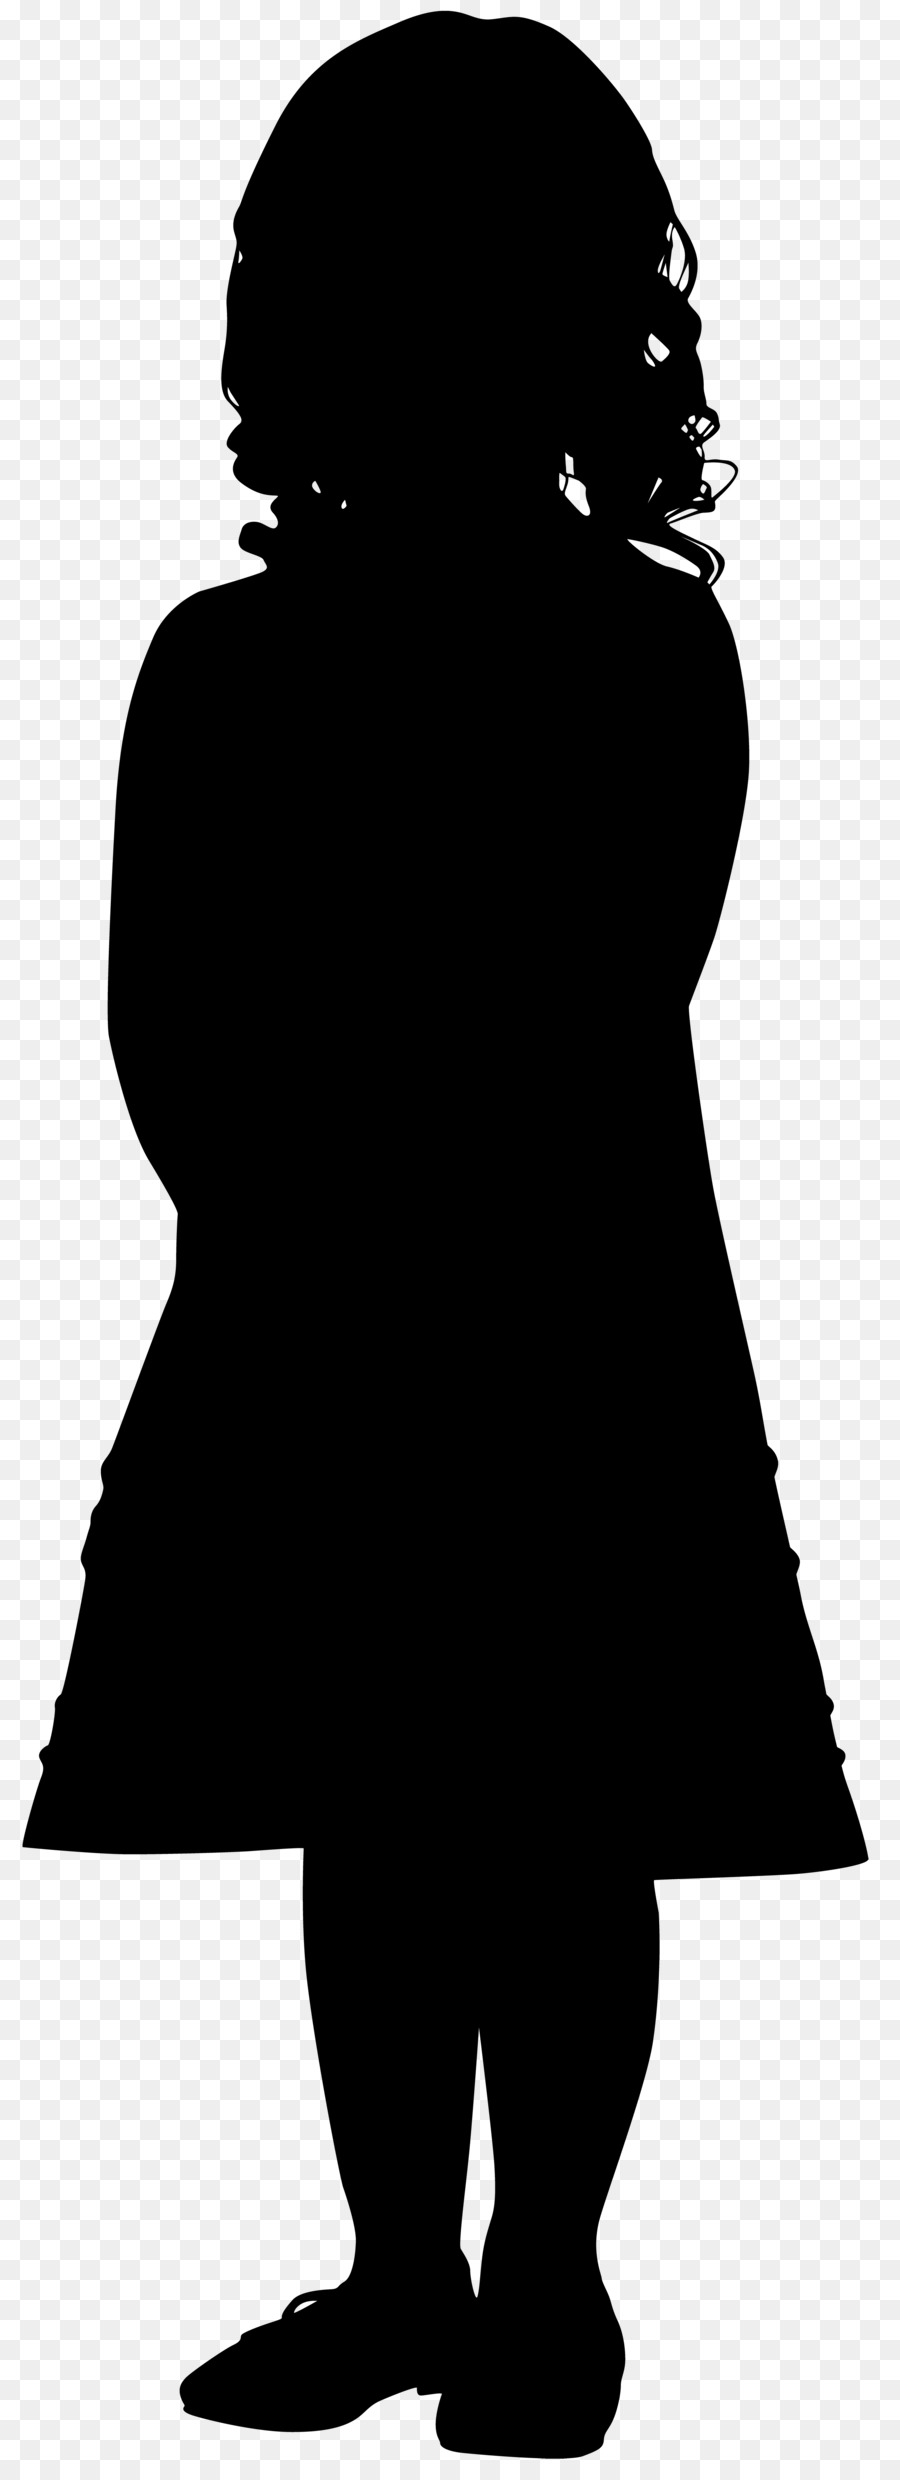 Silhouette Woman Clip art - sillhouette png download - 2922*8000 - Free Transparent  png Download.